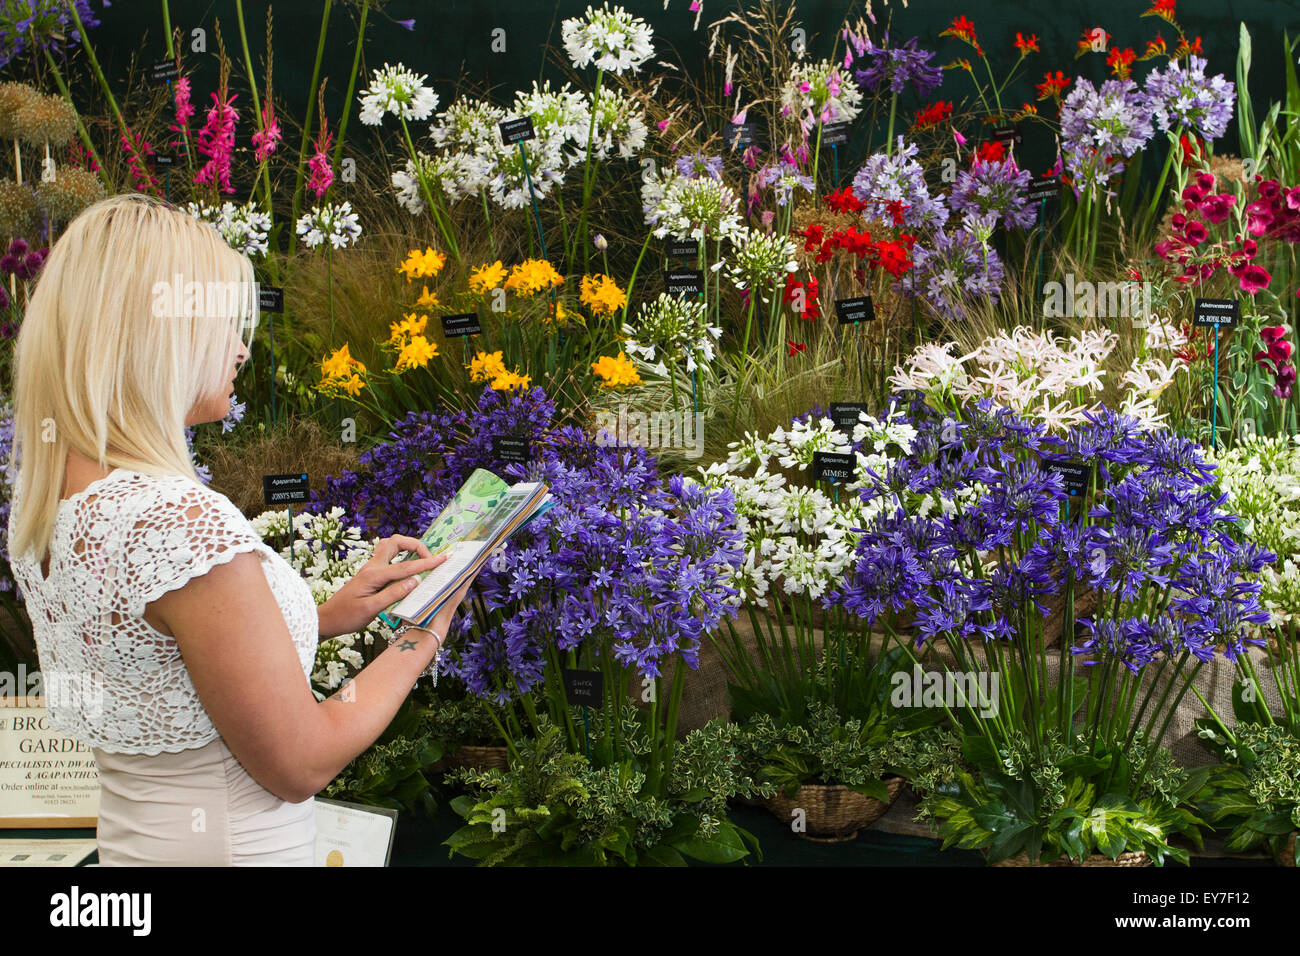 Cheshire, UK. 23rd July, 2015. Ashleigh Edwards, 24 years old from Southport in Merseyside, admiring the award winning display of Dwarf bulbs and Agapanthus at the 17th annual RHS Tatton Park Flower festival at Tatton Park in Knutsford, Cheshire.  Credit:  Cernan Elias/Alamy Live News Stock Photo